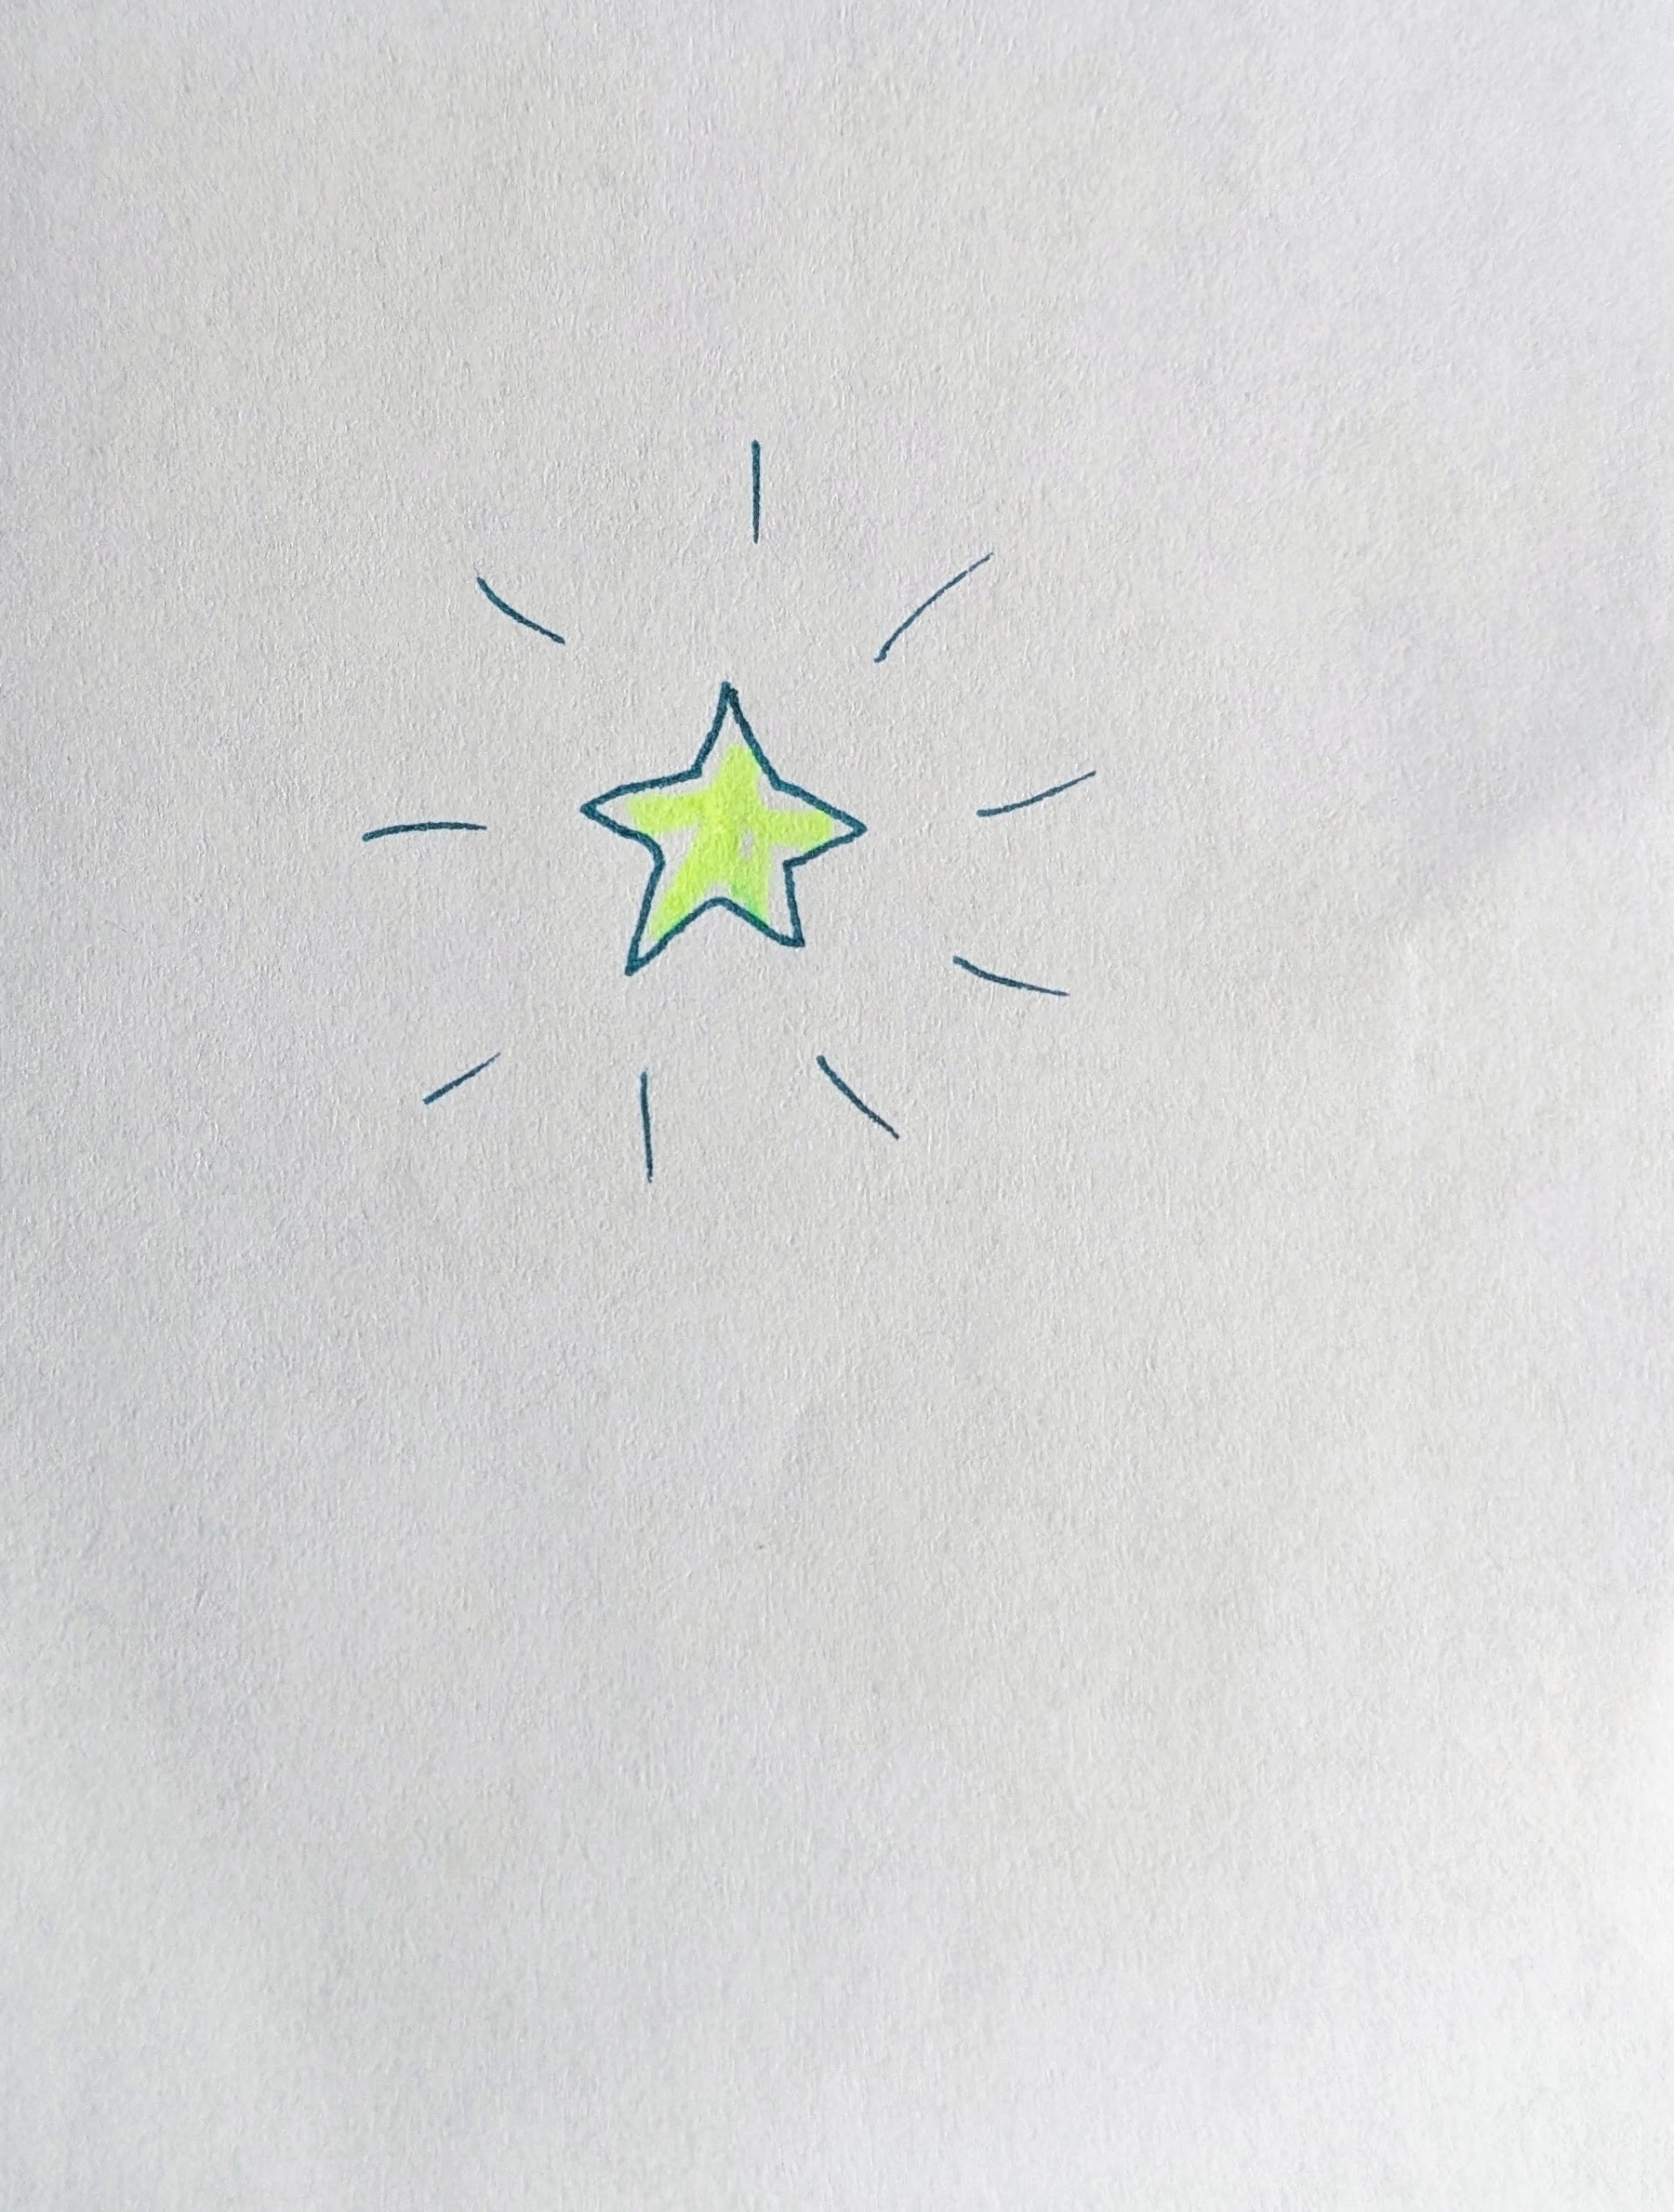 drawing of a small shining five-pointed star with a lot of white space around it